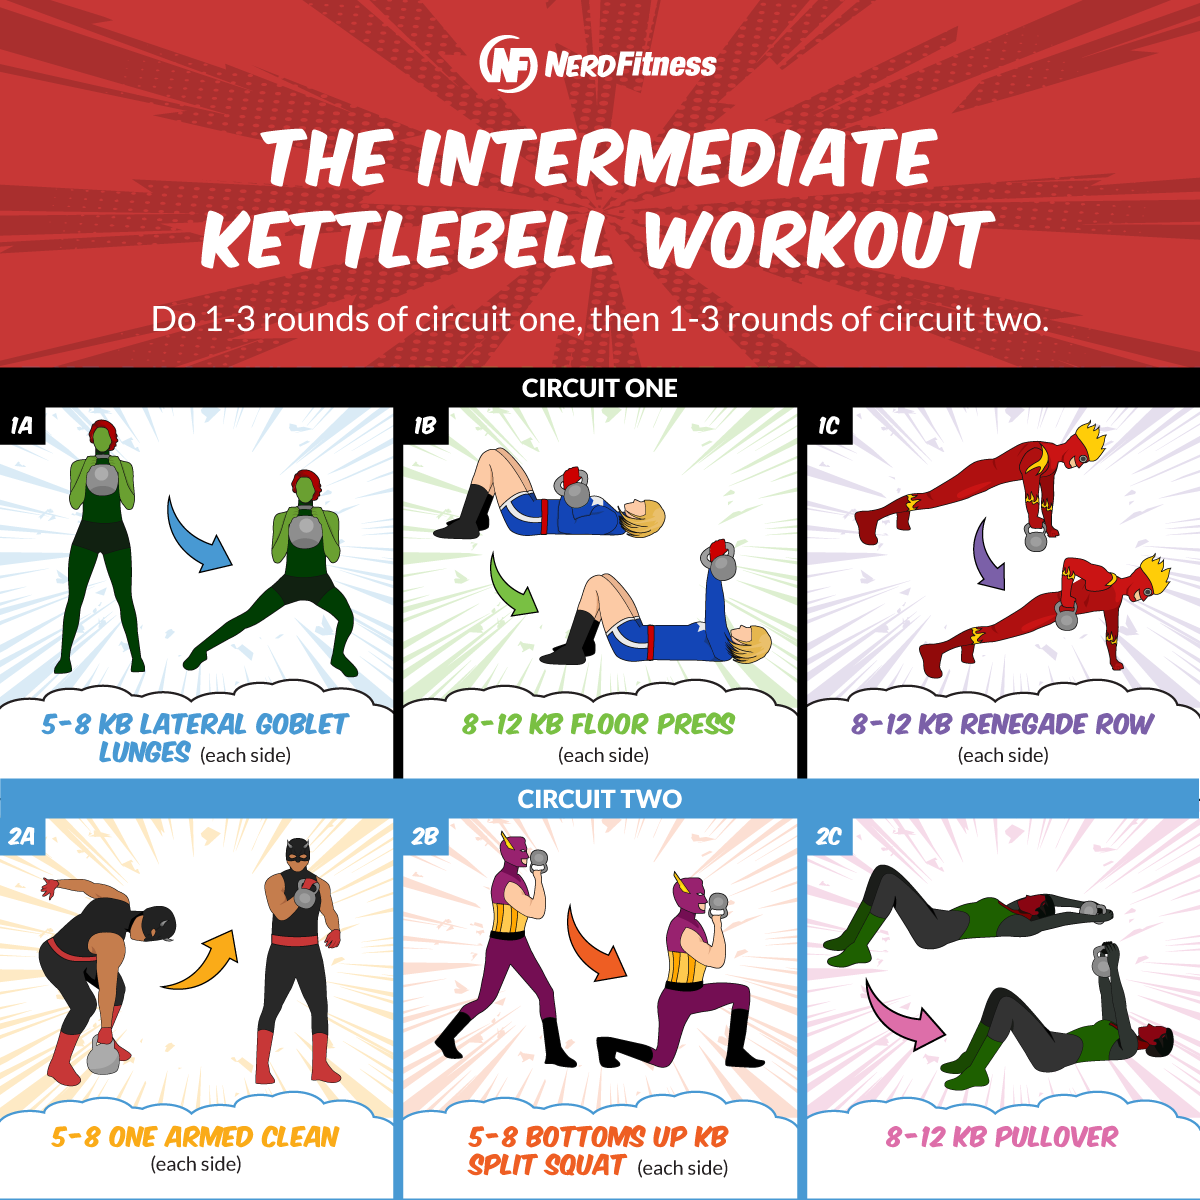 The Kettlebell Workout (20-Minute Routine for Beginners)